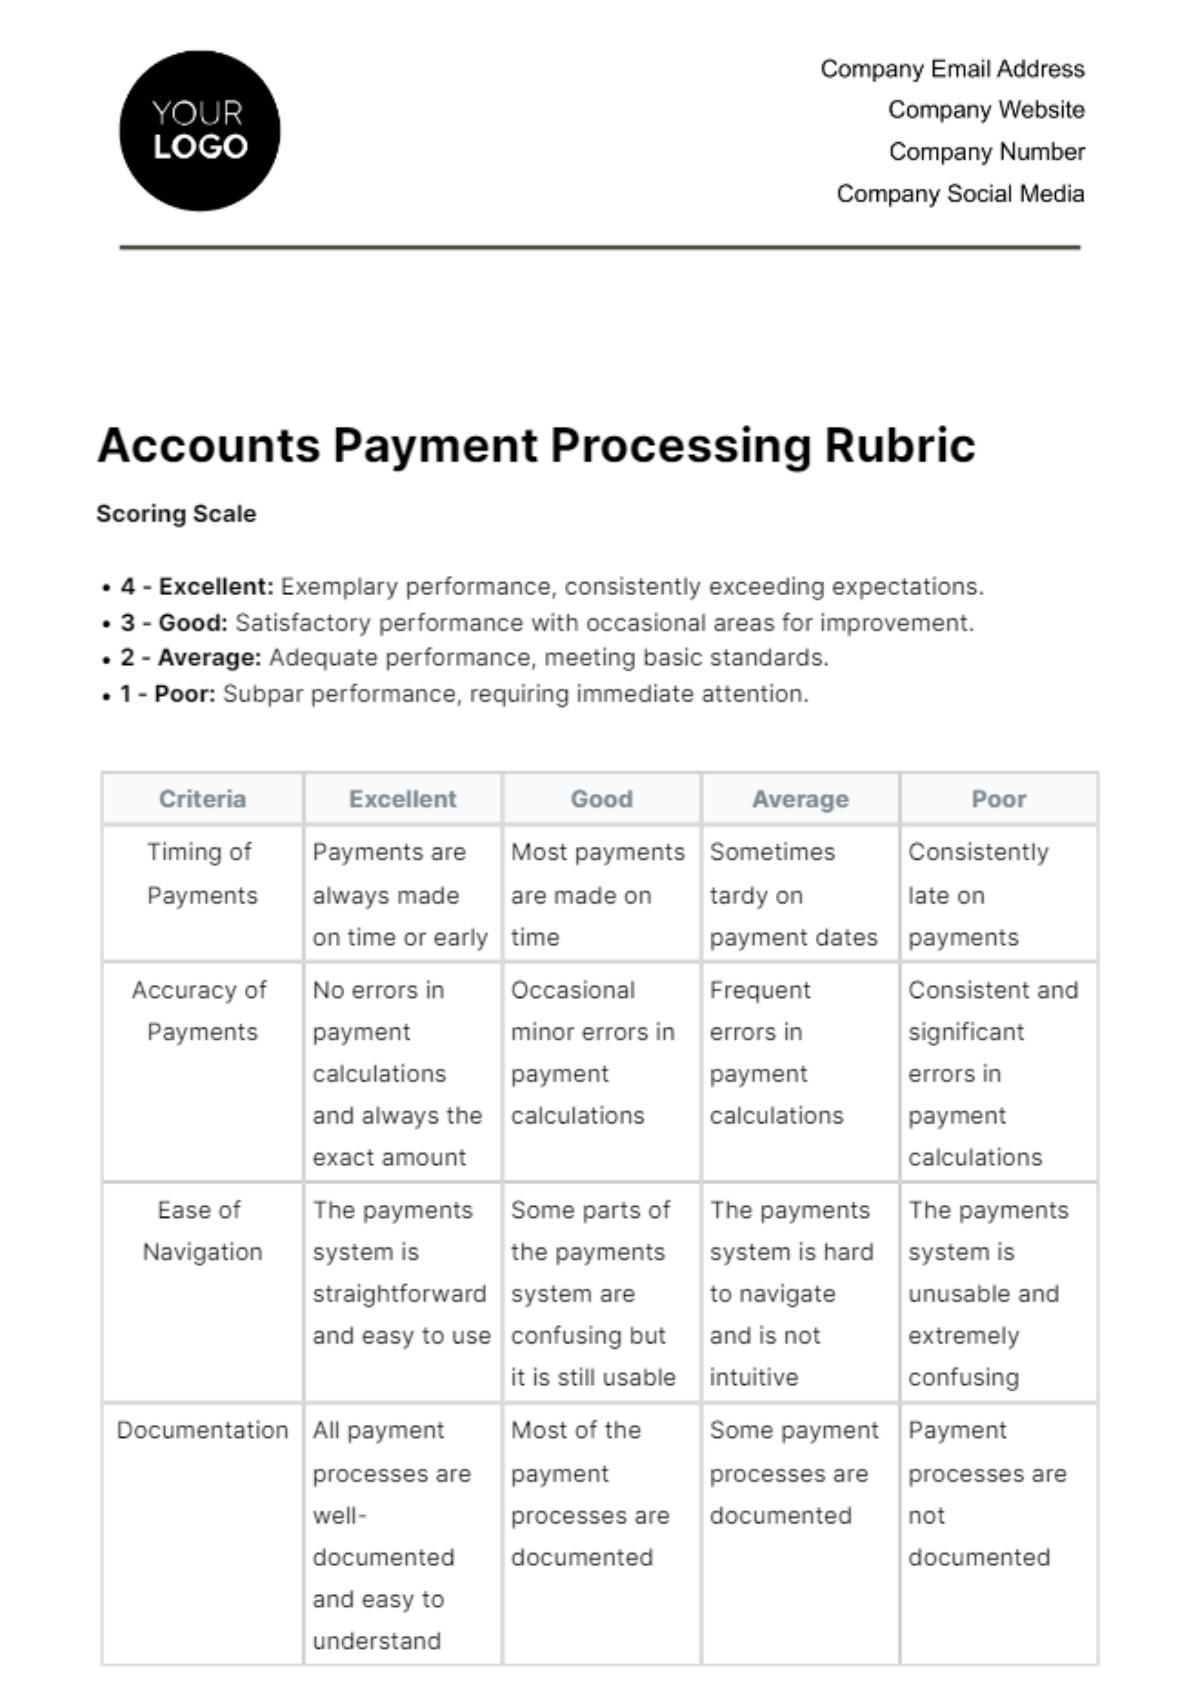 Accounts Payment Processing Rubric Template